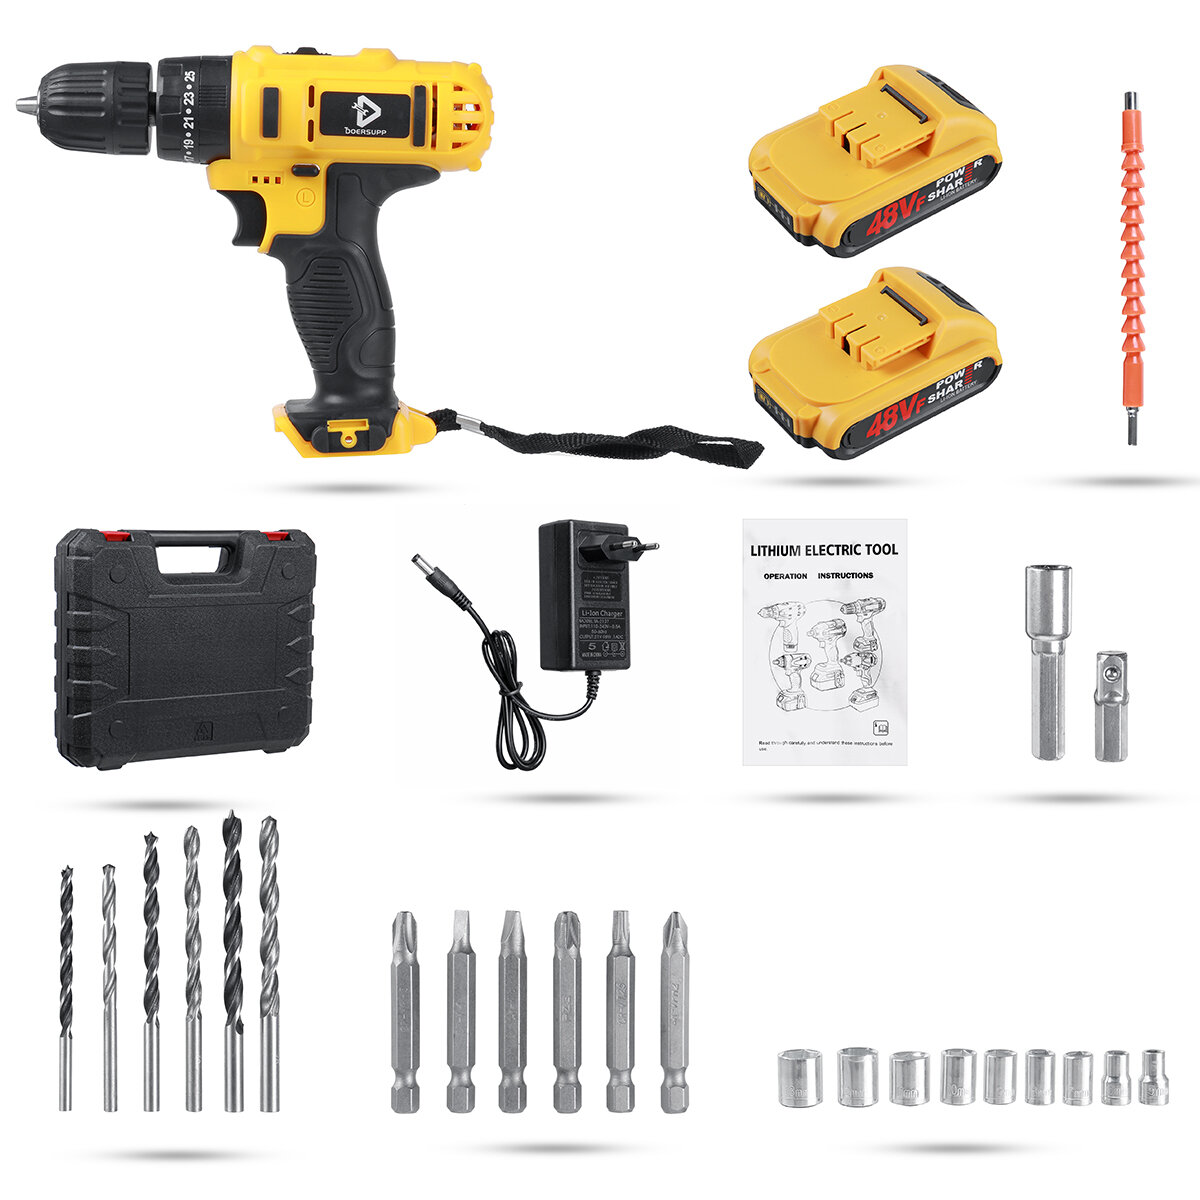 Image of DOERSUPP 48VF Impact Drill Cordless Screwdriver Drill 25+3 Torque 2 Speed Drilling Battery Indicator Tool